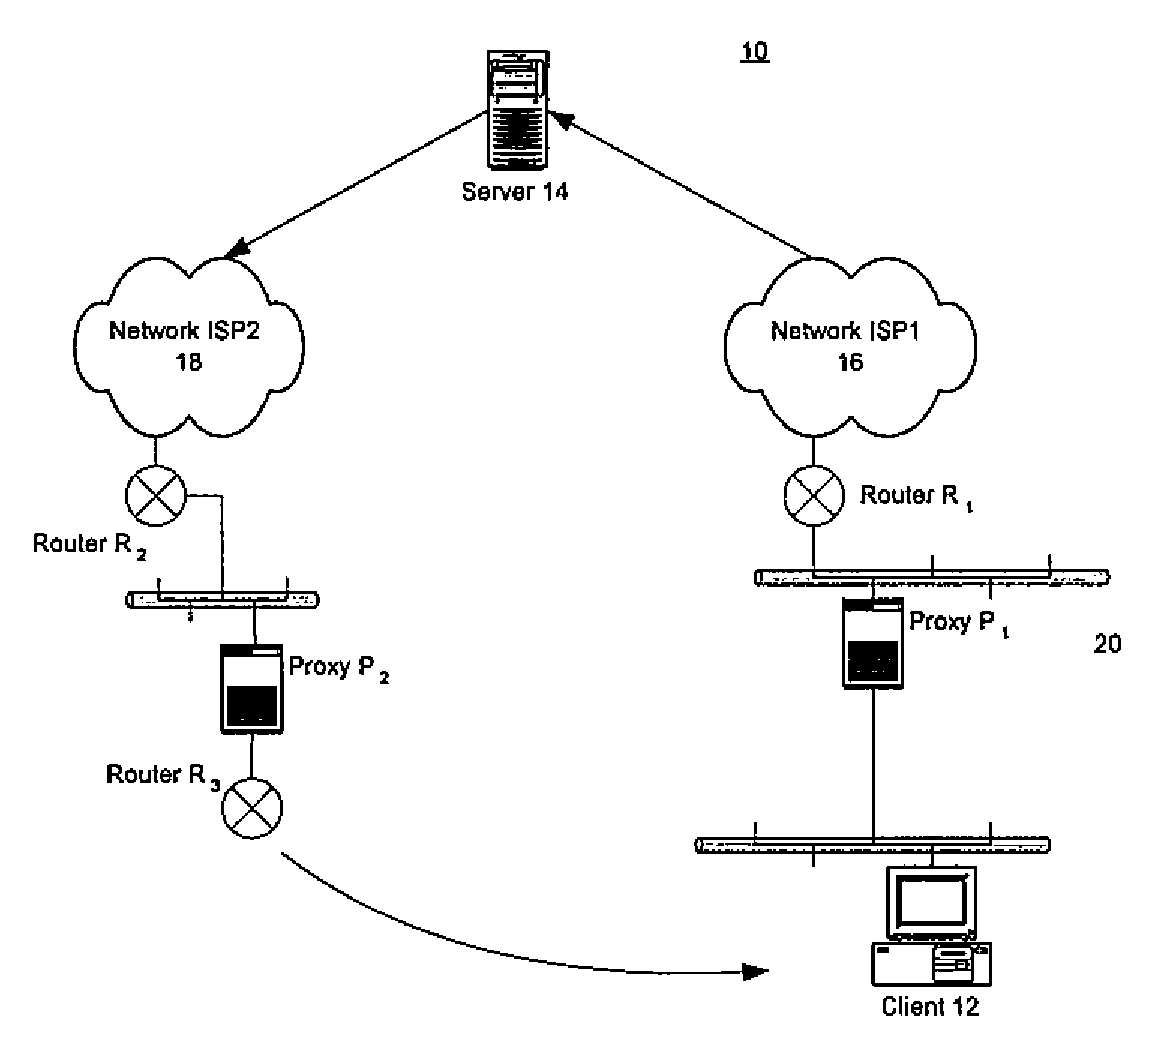 System and Method of Traffic Inspection and Stateful Connection Forwarding Among Geographically Dispersed Network Appliances Organized as Clusters